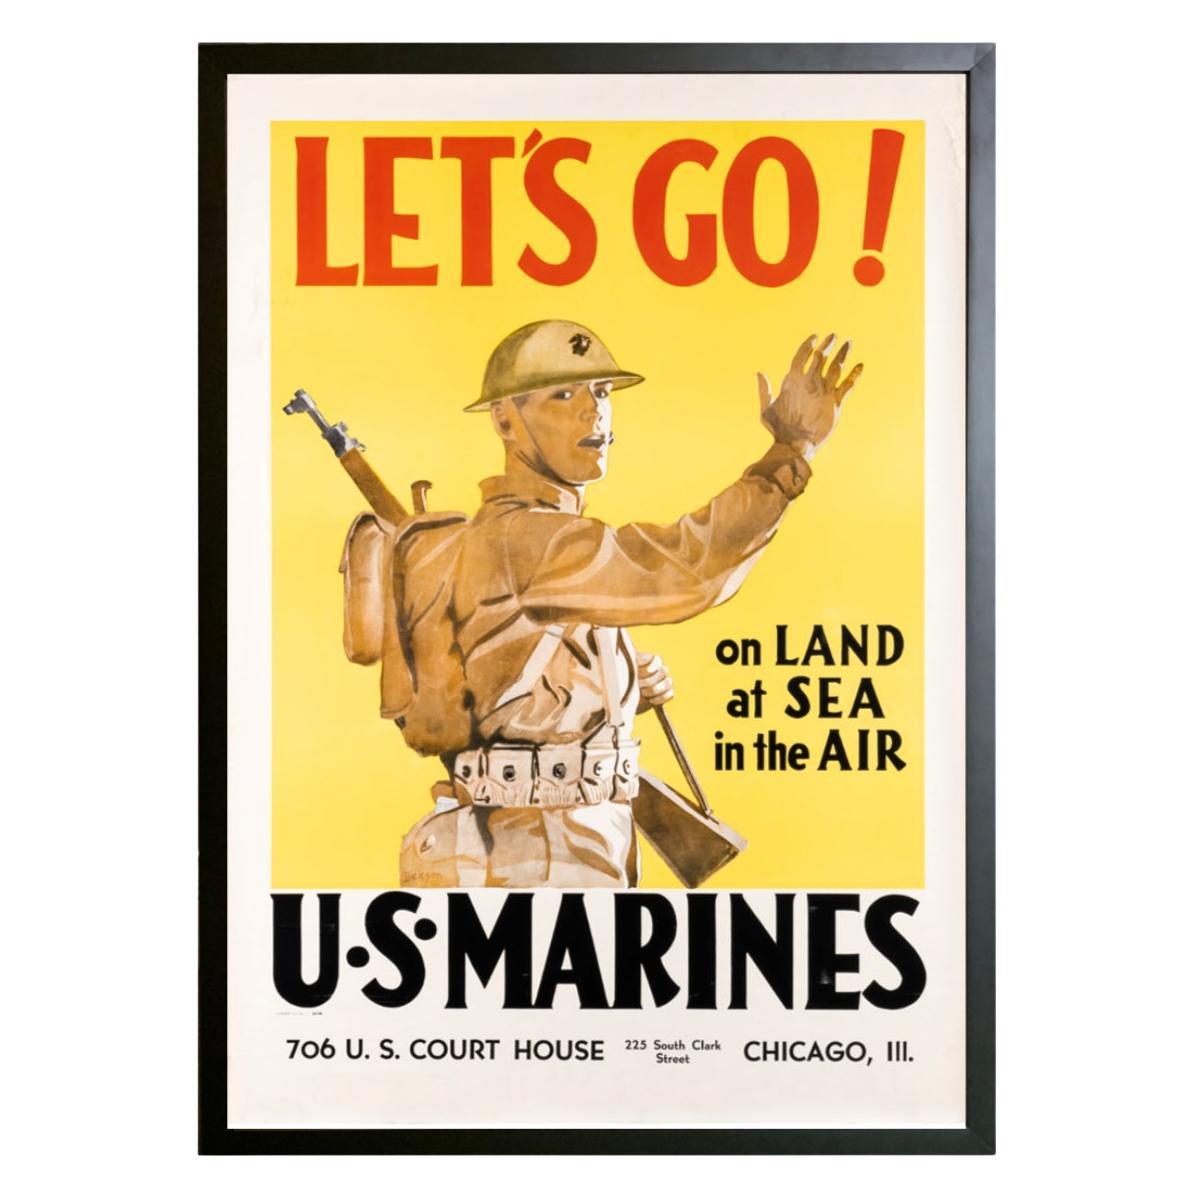 "Let's Go". U.S. Marines" Vintage WWII Recruitment Poster by Dickson, 1941